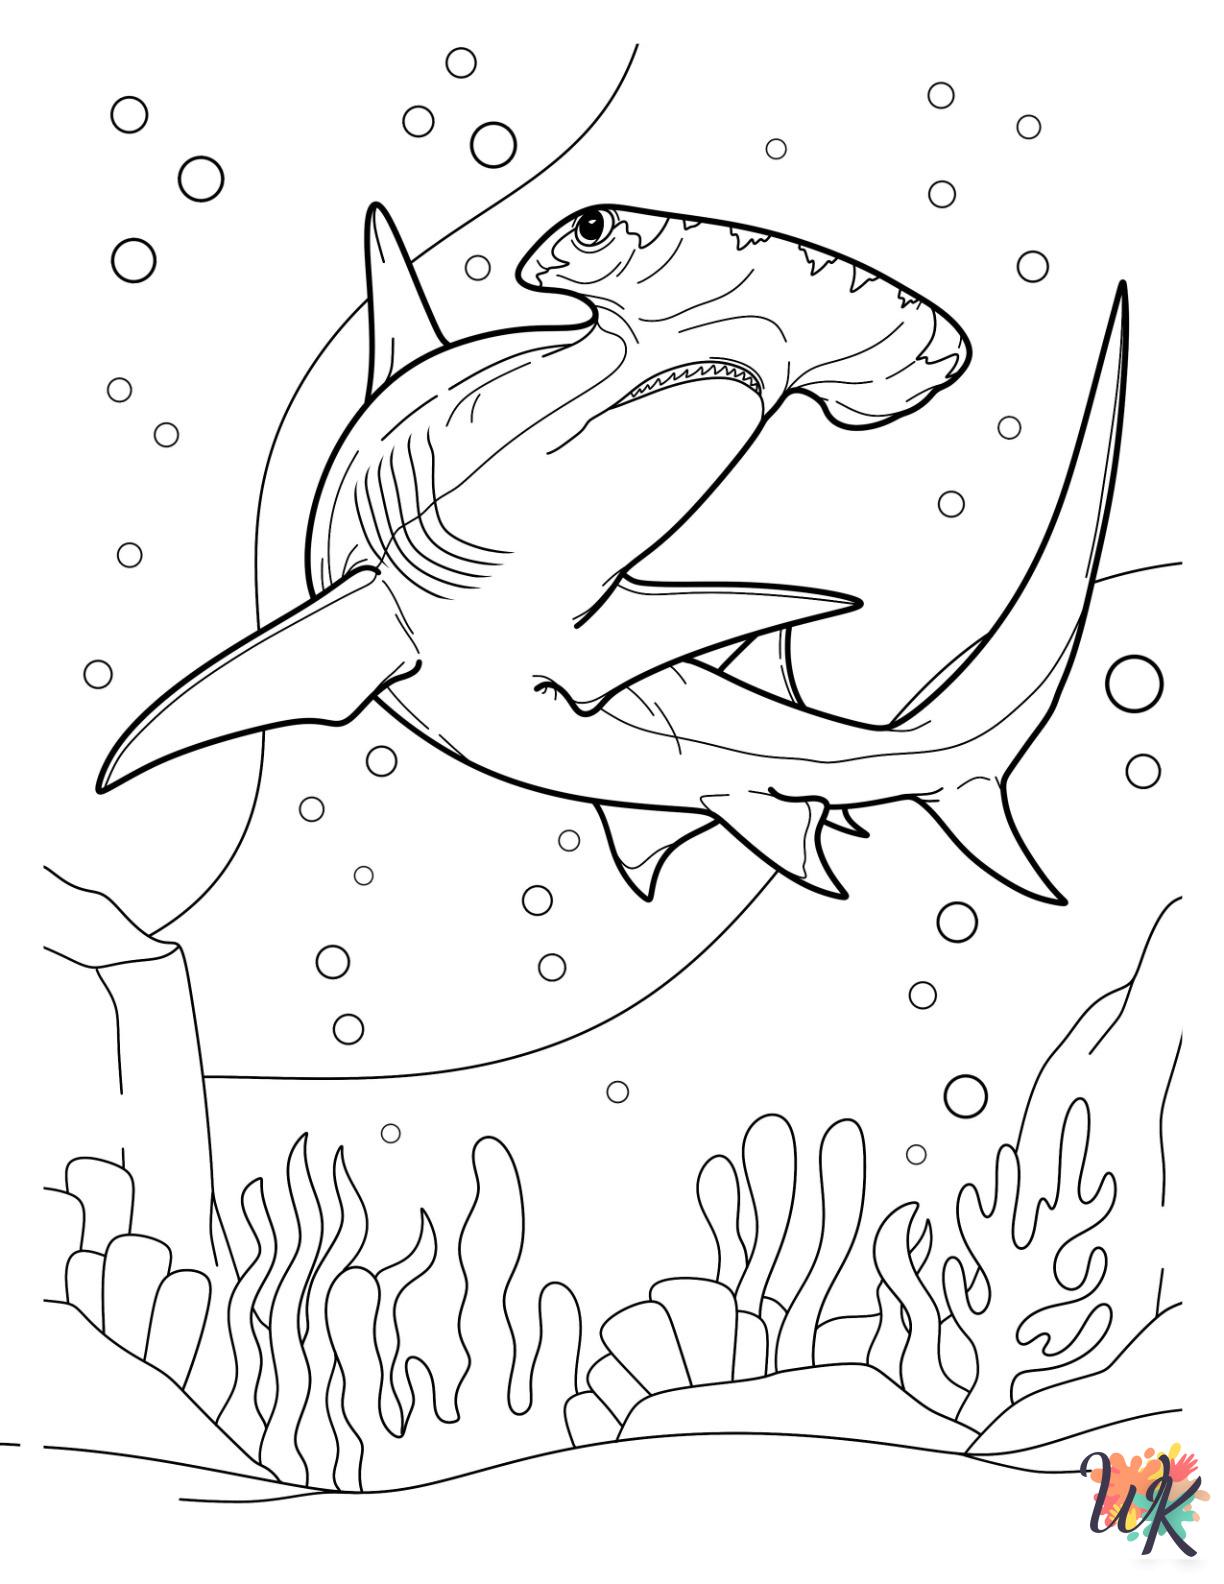 Hammerhead Shark cards coloring pages